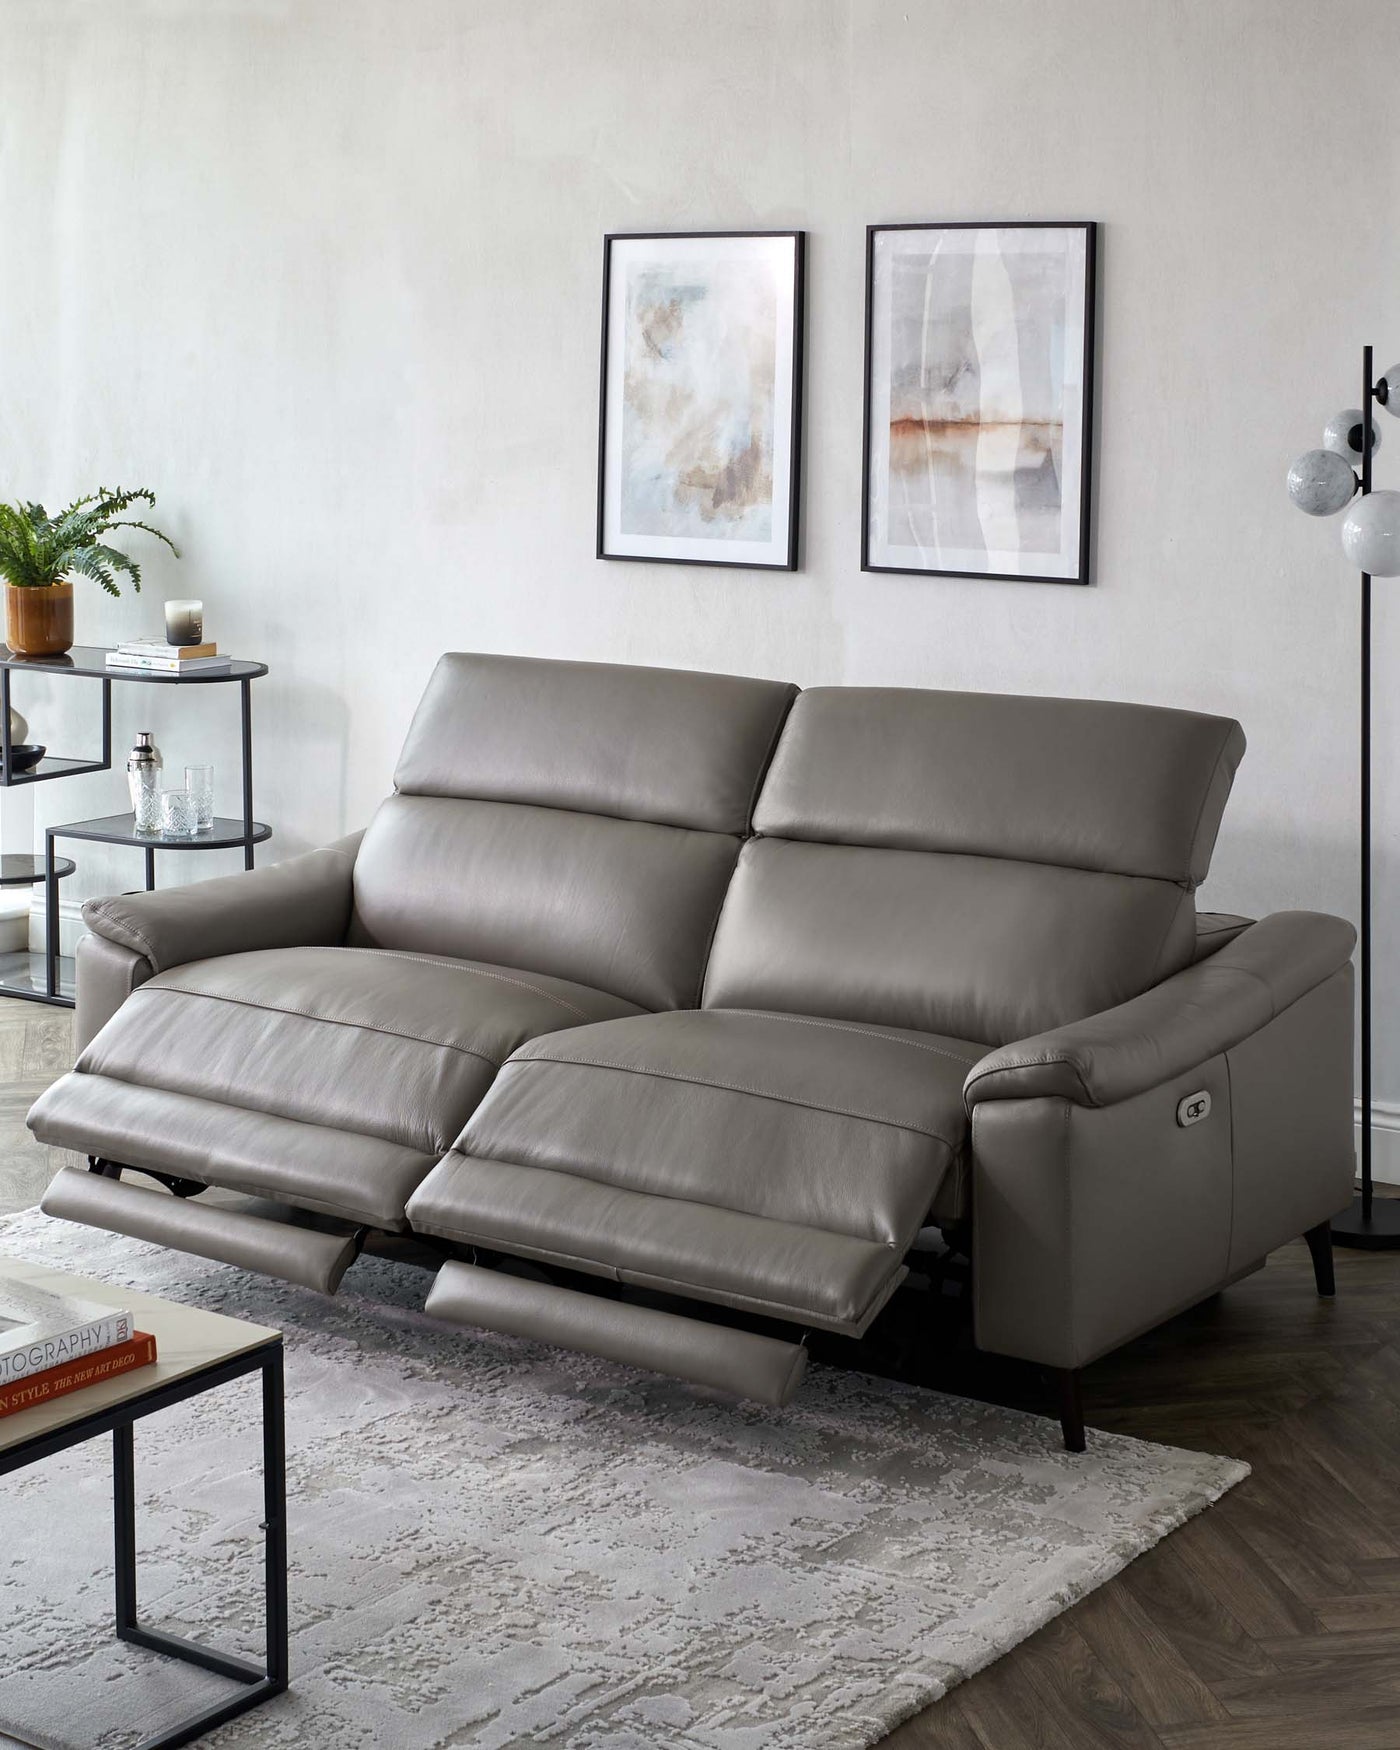 Modern grey leather sectional sofa with adjustable headrests and extended footrest on one end. Contemporary black metal and glass side table, along with a minimalist black frame coffee table with a glass top, on a textured off-white area rug.